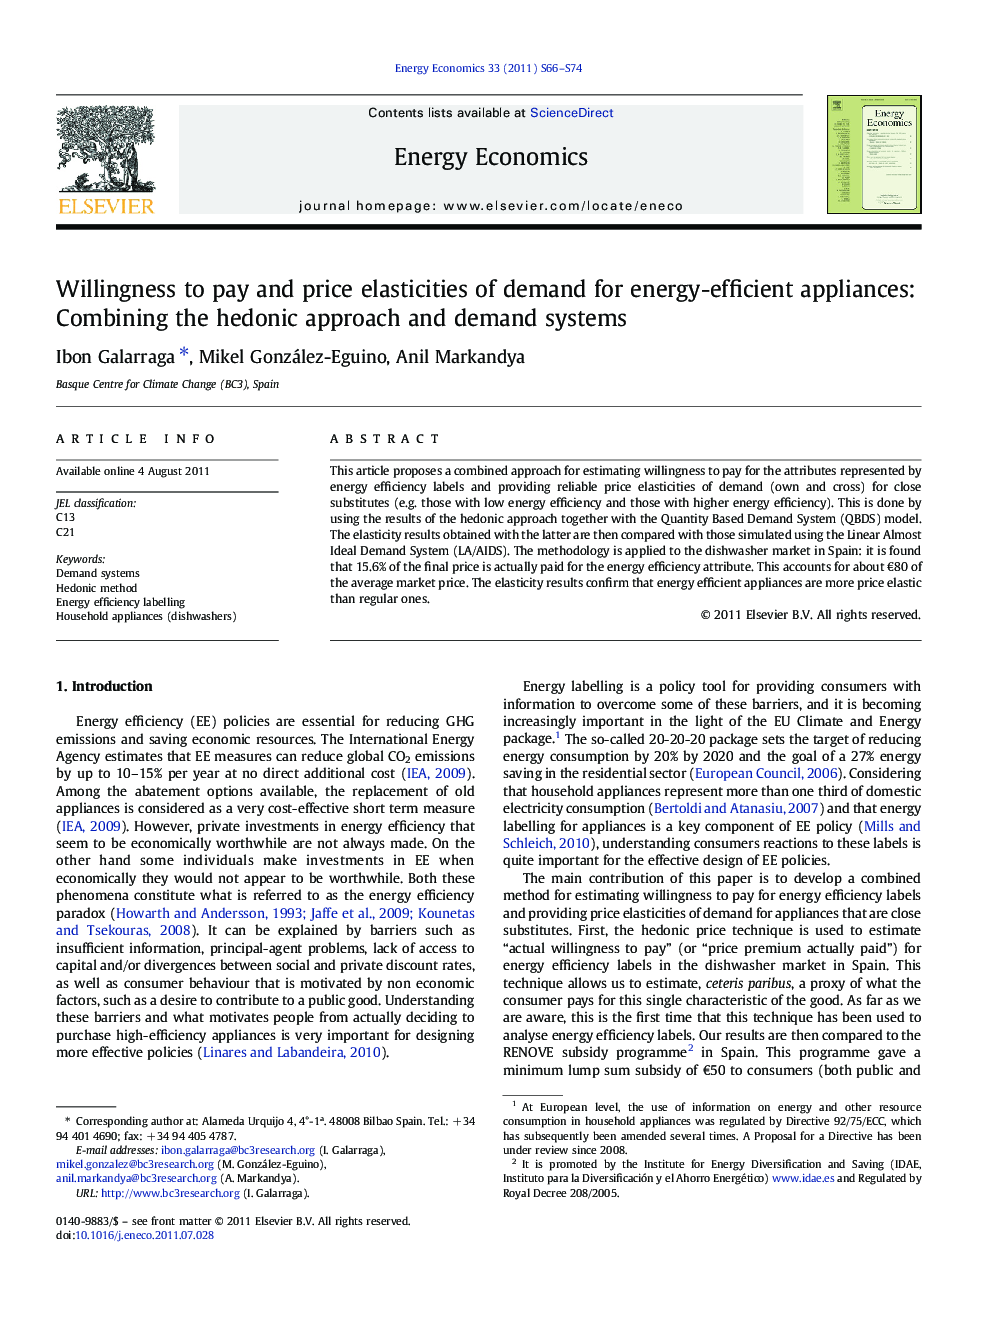 Willingness to pay and price elasticities of demand for energy-efficient appliances: Combining the hedonic approach and demand systems